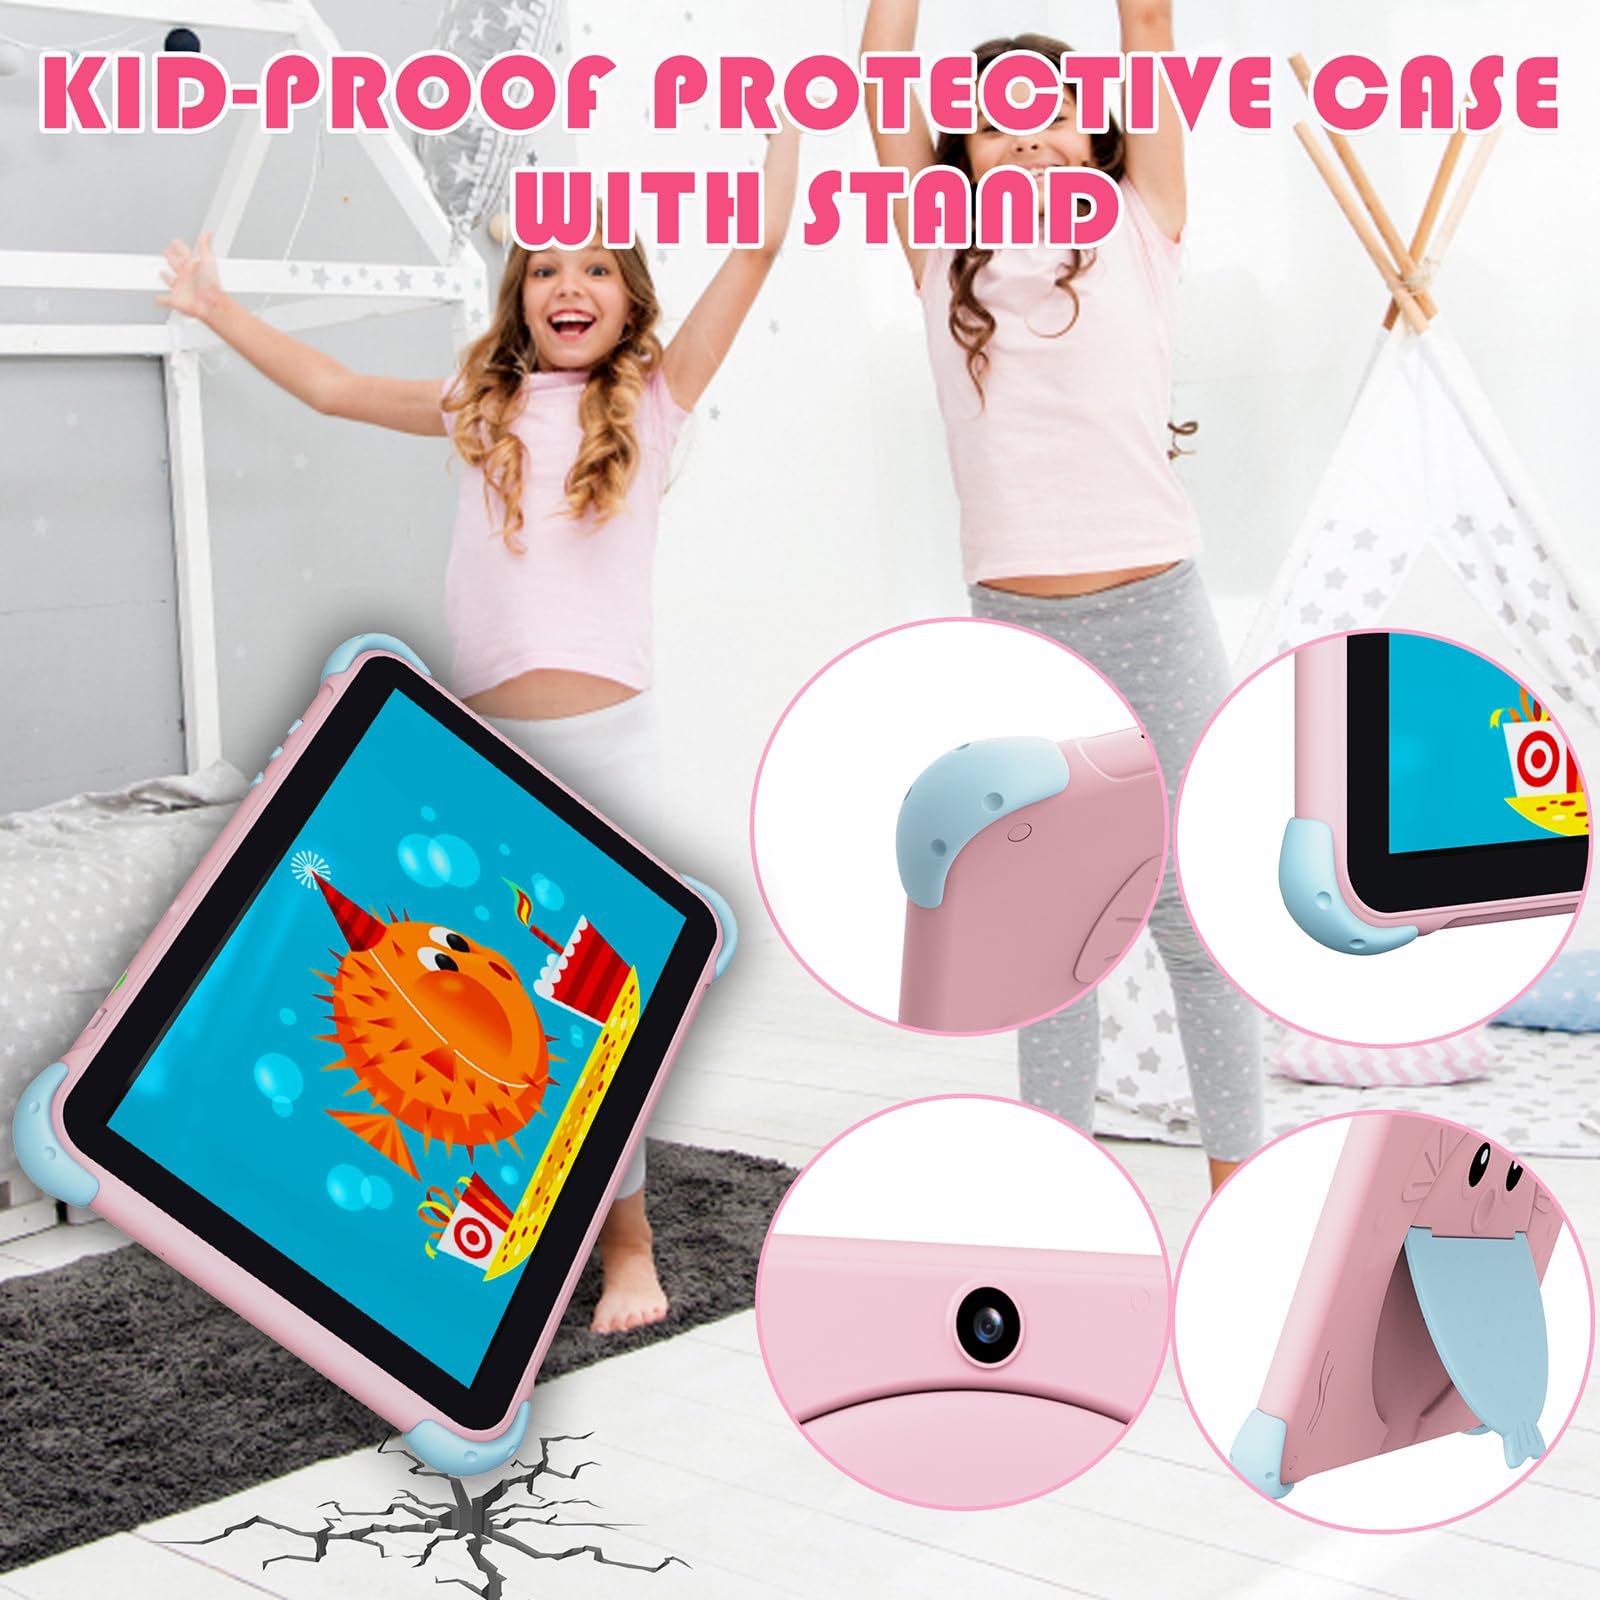 Kids Tablet 10.1 inch Toddler Tablet for Kids WiFi Kids Tablets Android with Dual Camera Android 11.0 2GB 32GB ROM 1280x800 HD IPS Touchscreen Parental Control YouTube Neflix (Pink)